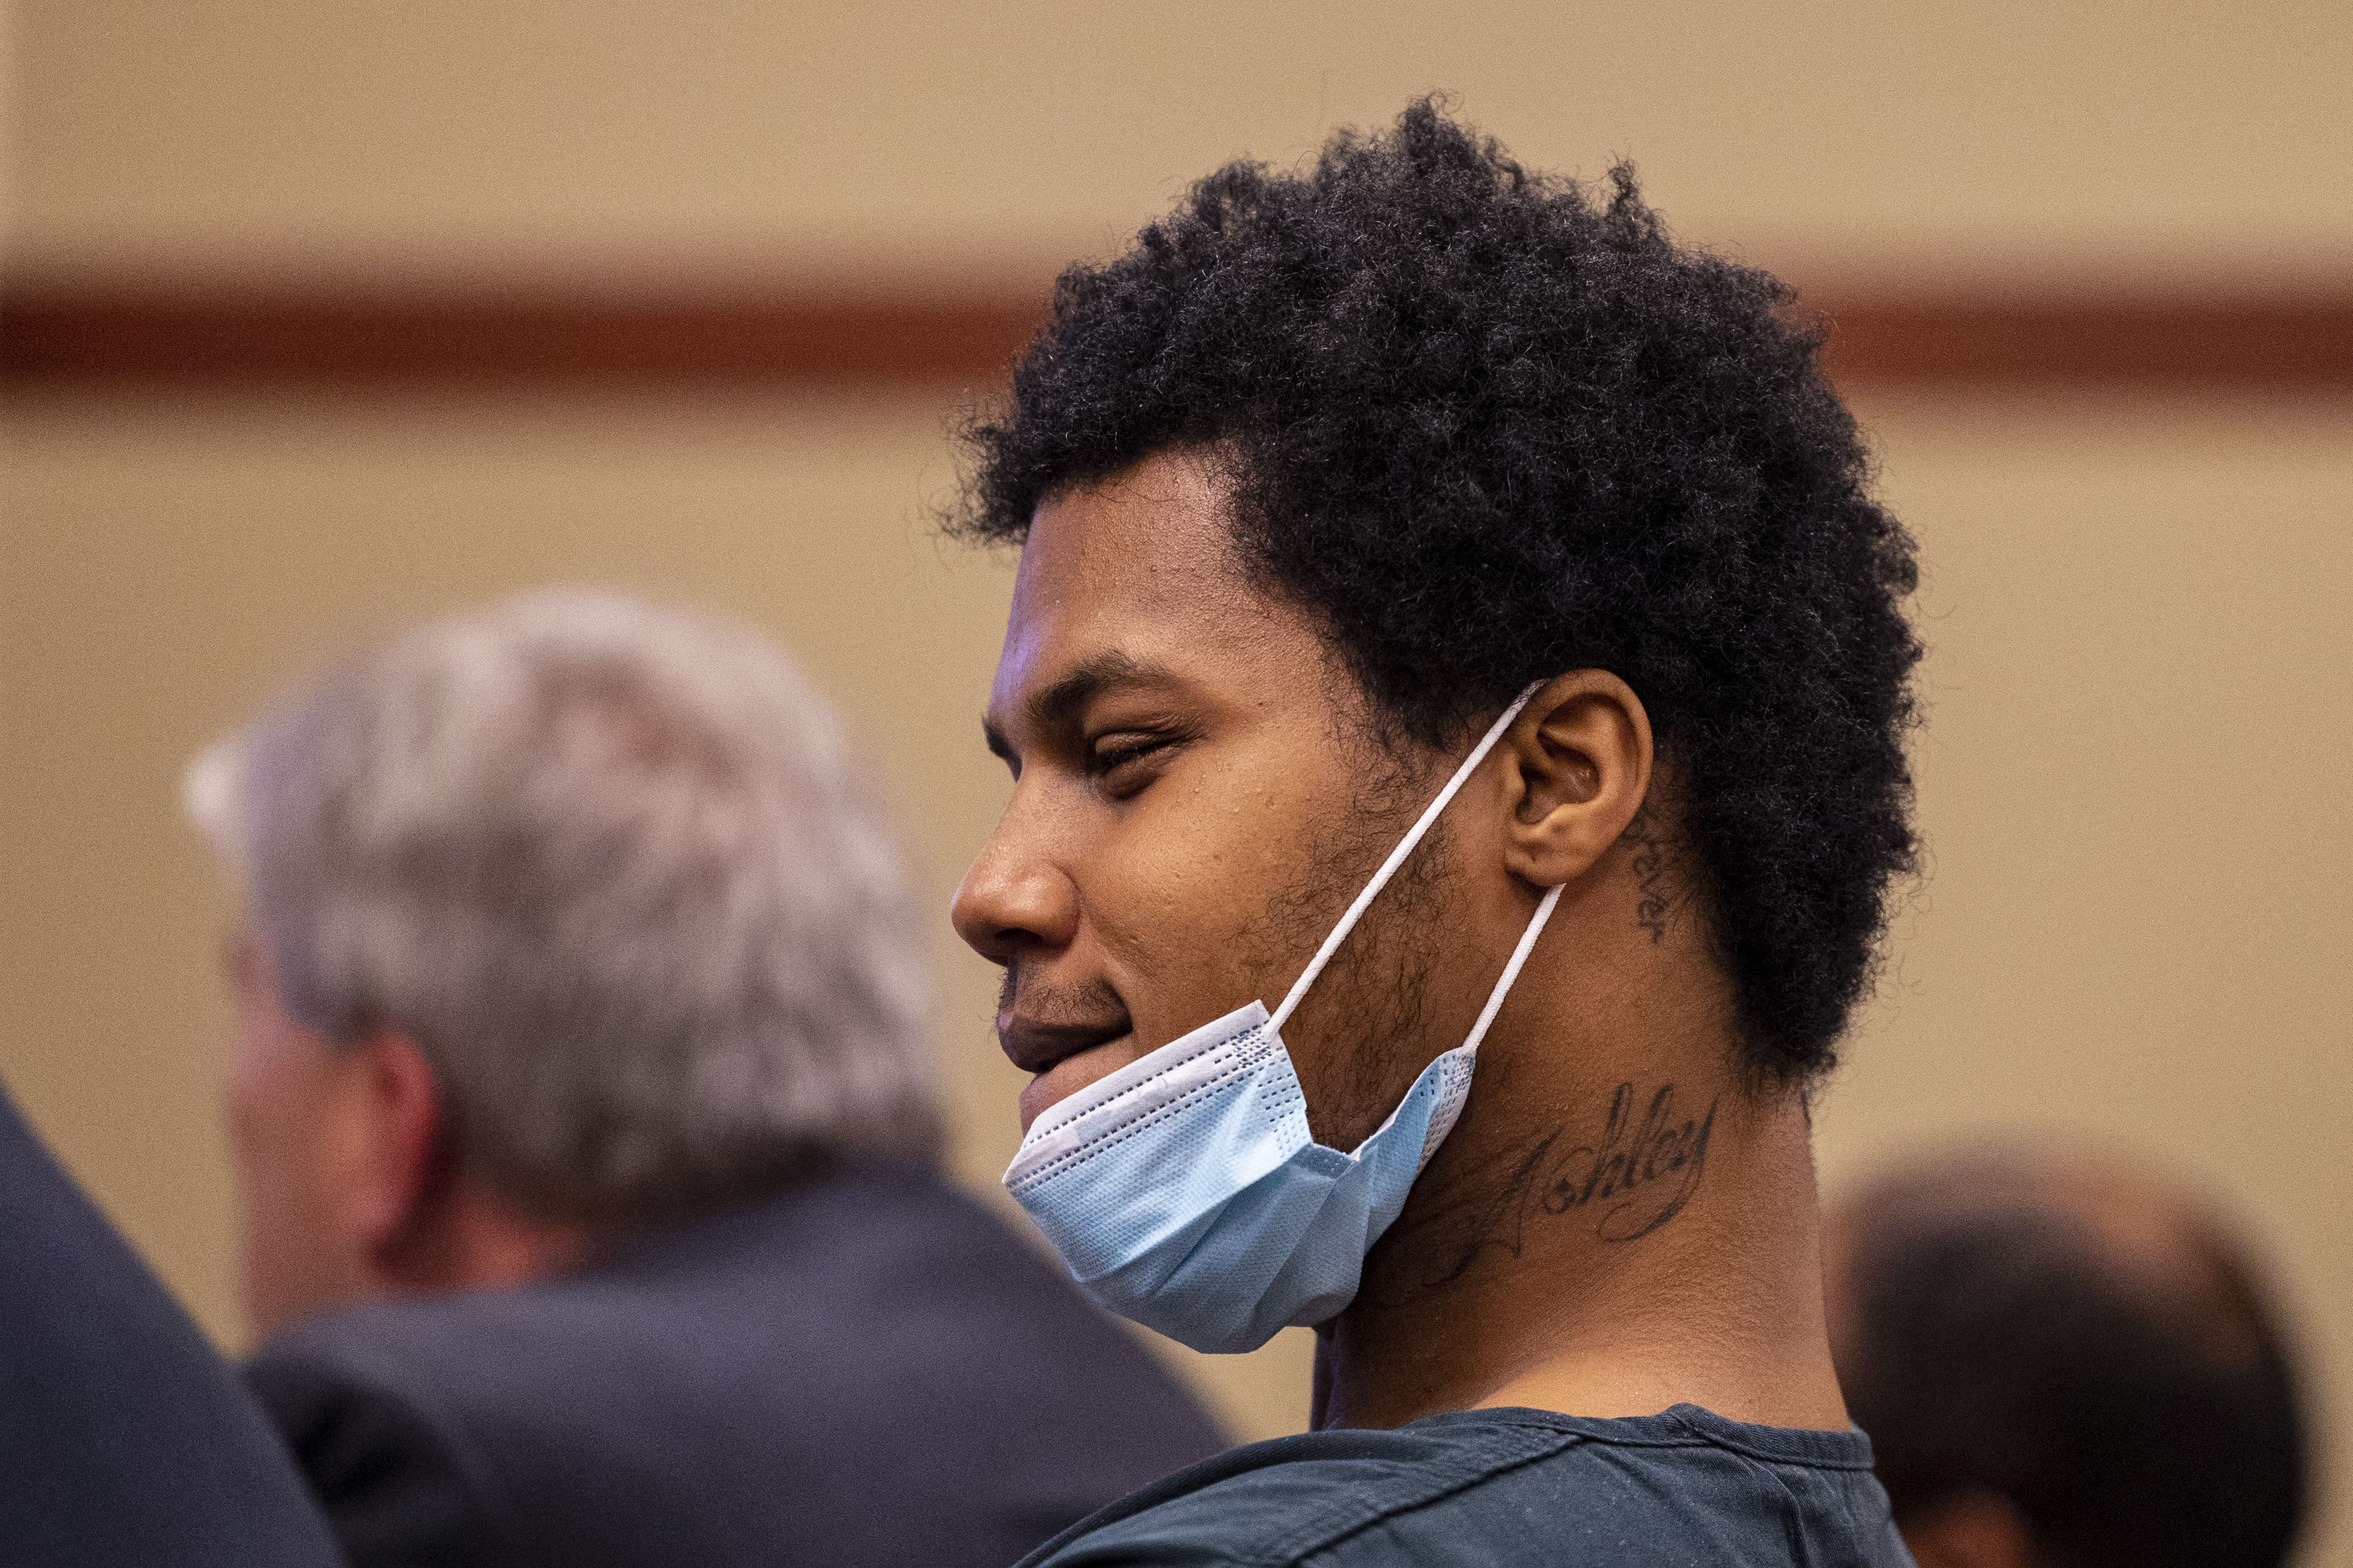 Rishy Manning, 22, appears for preliminary examination at the 63rd District Courthouse in Grand Rapids, Michigan on Thursday, June 30, 2022. The trio of defendants appeared in court, (not pictured Javonte Rosa, 23 and Jaheim Hayes—Goree, 20) are charged with felony murder in the shooting death of Joseph Wilder, 50, who was shot and killed during a robbery attempt at a Huntington Bank ATM on South Division Avenue in May of 2022. (Joel Bissell | MLive.com)